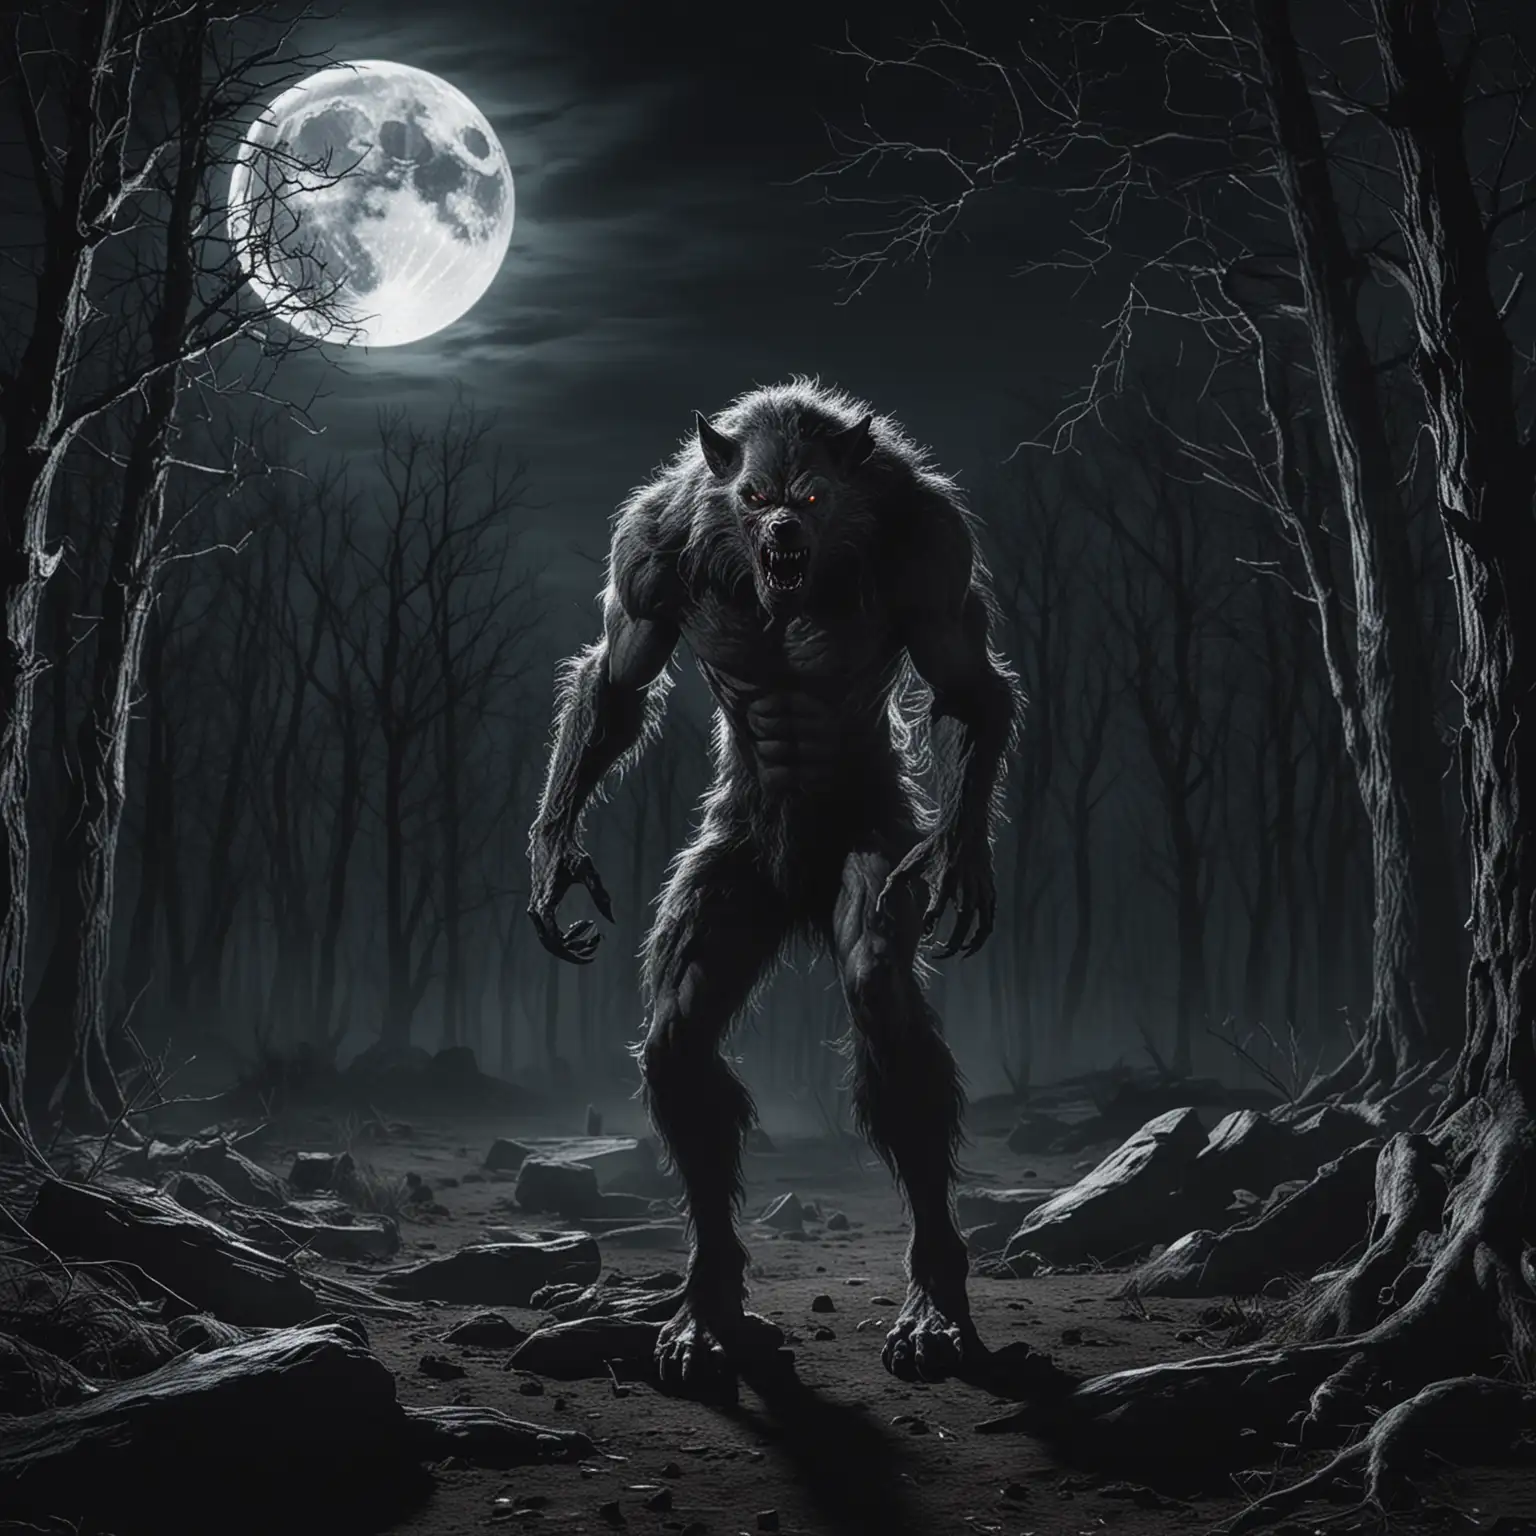 Werewolf in Barren Forest at Night with Full Moon